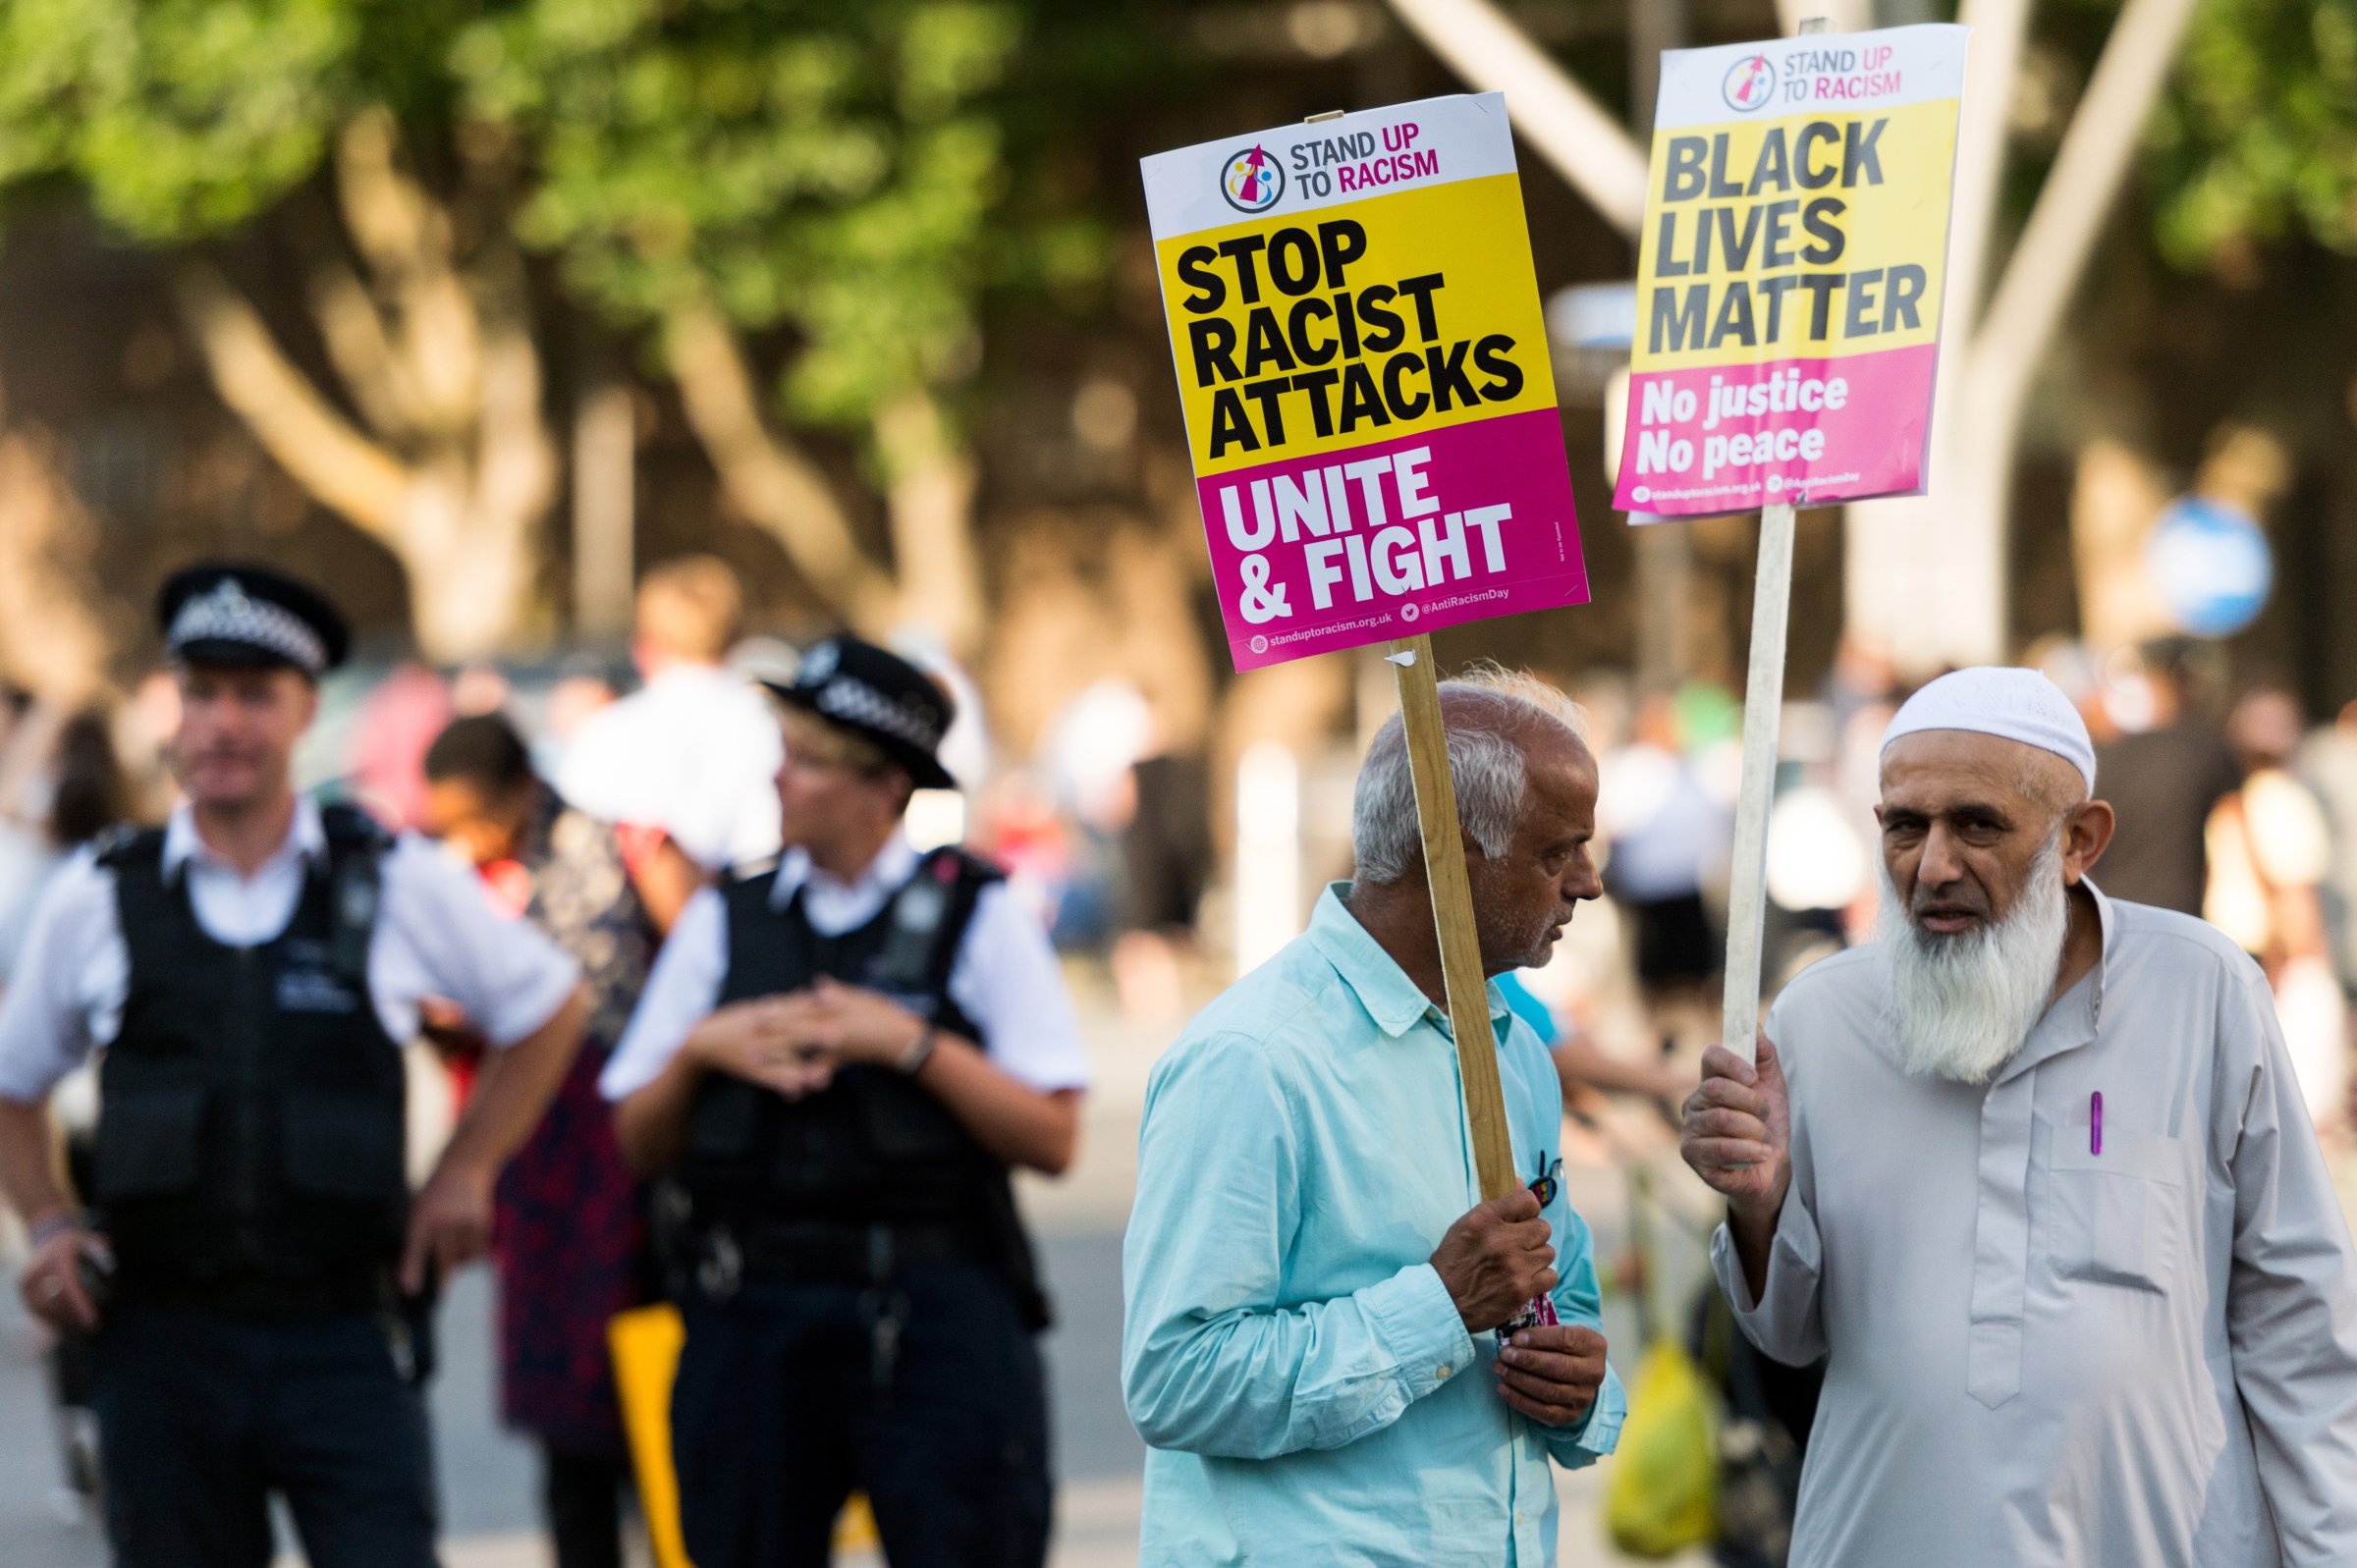 Protesters hold banners reading "Black Lives Matter - No Justice, No Peace - Stop Racist Attacks - Unite And Fight" at a vigil for Resham Khan and Janeel Muhktar who were attacked with sulphuric acid in London, United Kingdom on July 05, 2017.